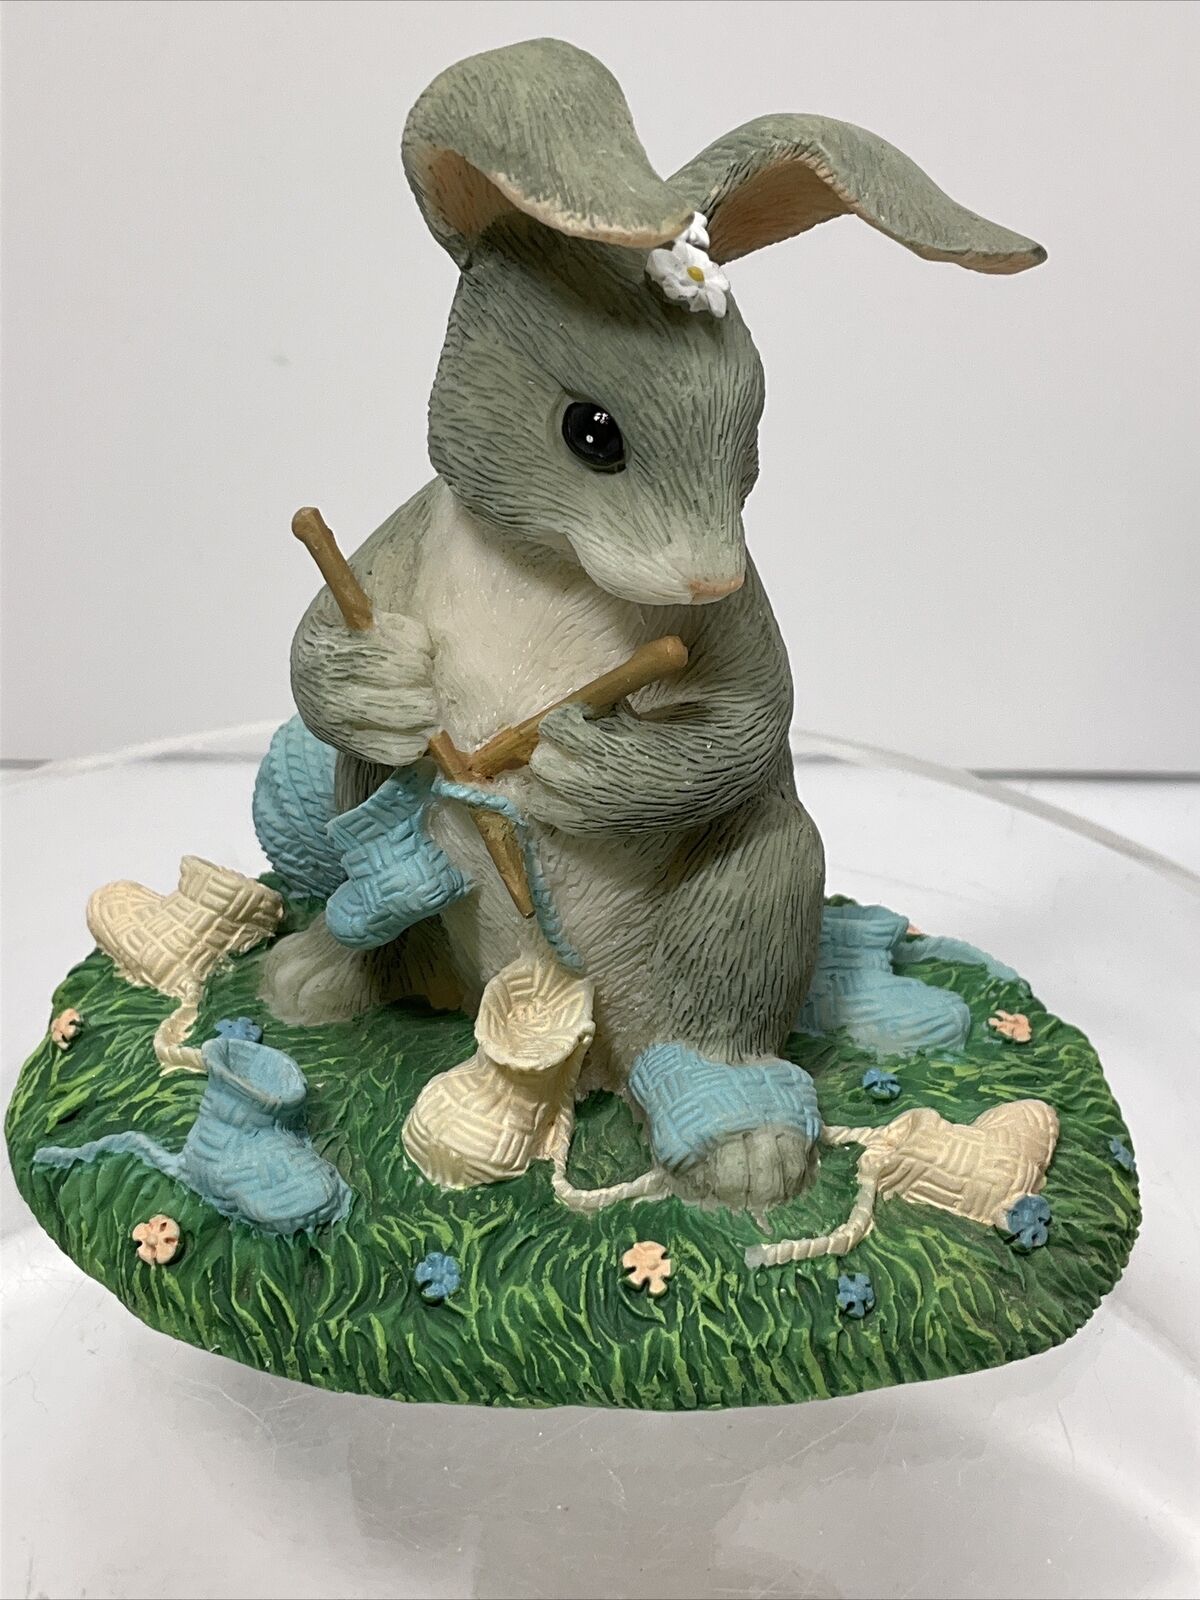 Charming Tails “Guess What” Bunny Figurine 1997 Vintage Fitz & Floyd With Box